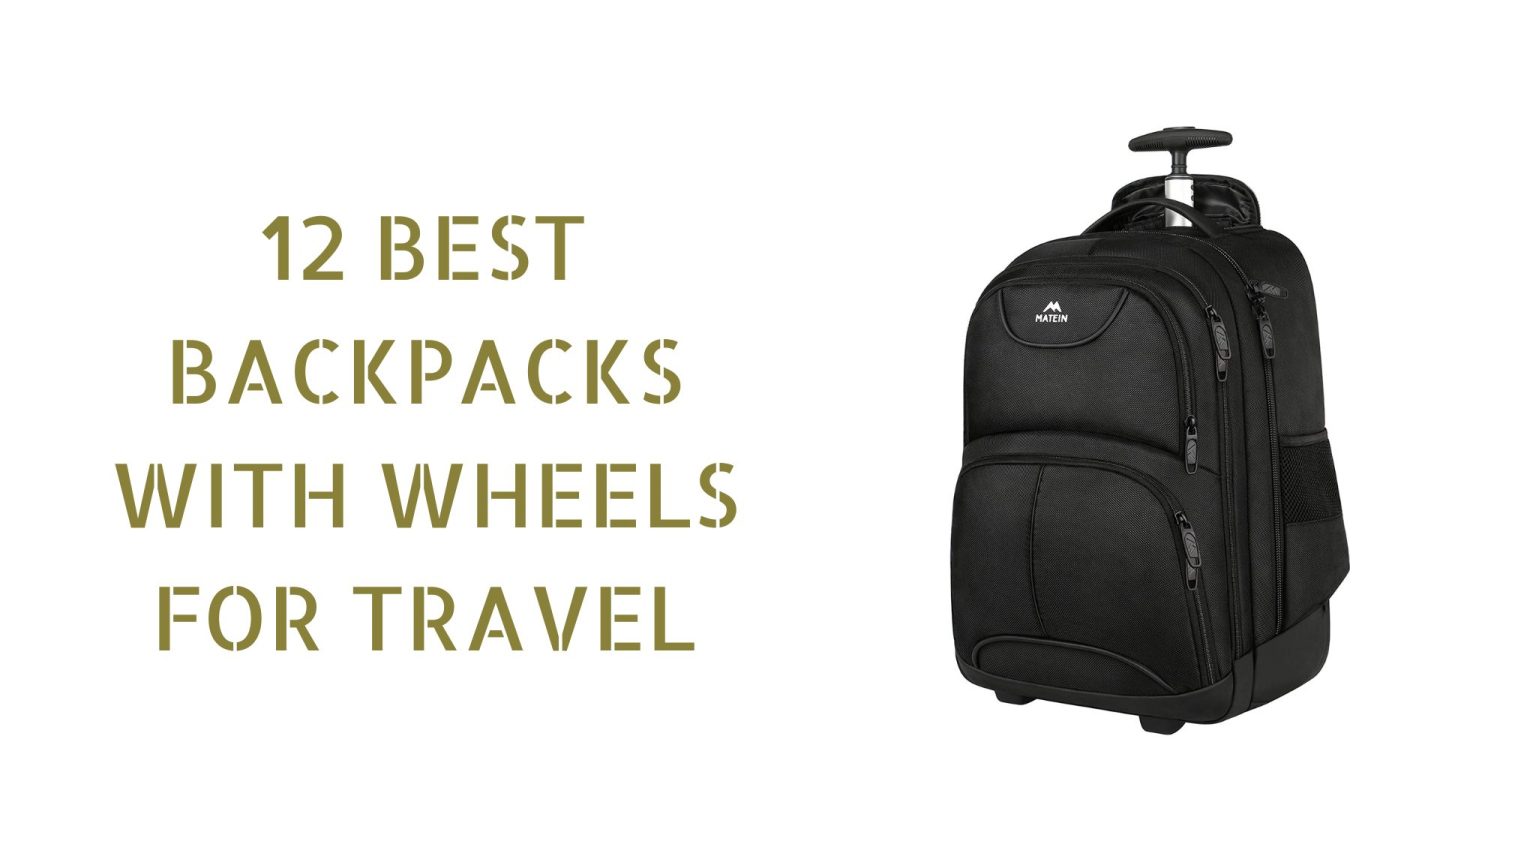 BACKPACKS WITH WHEELS FOR TRAVEL